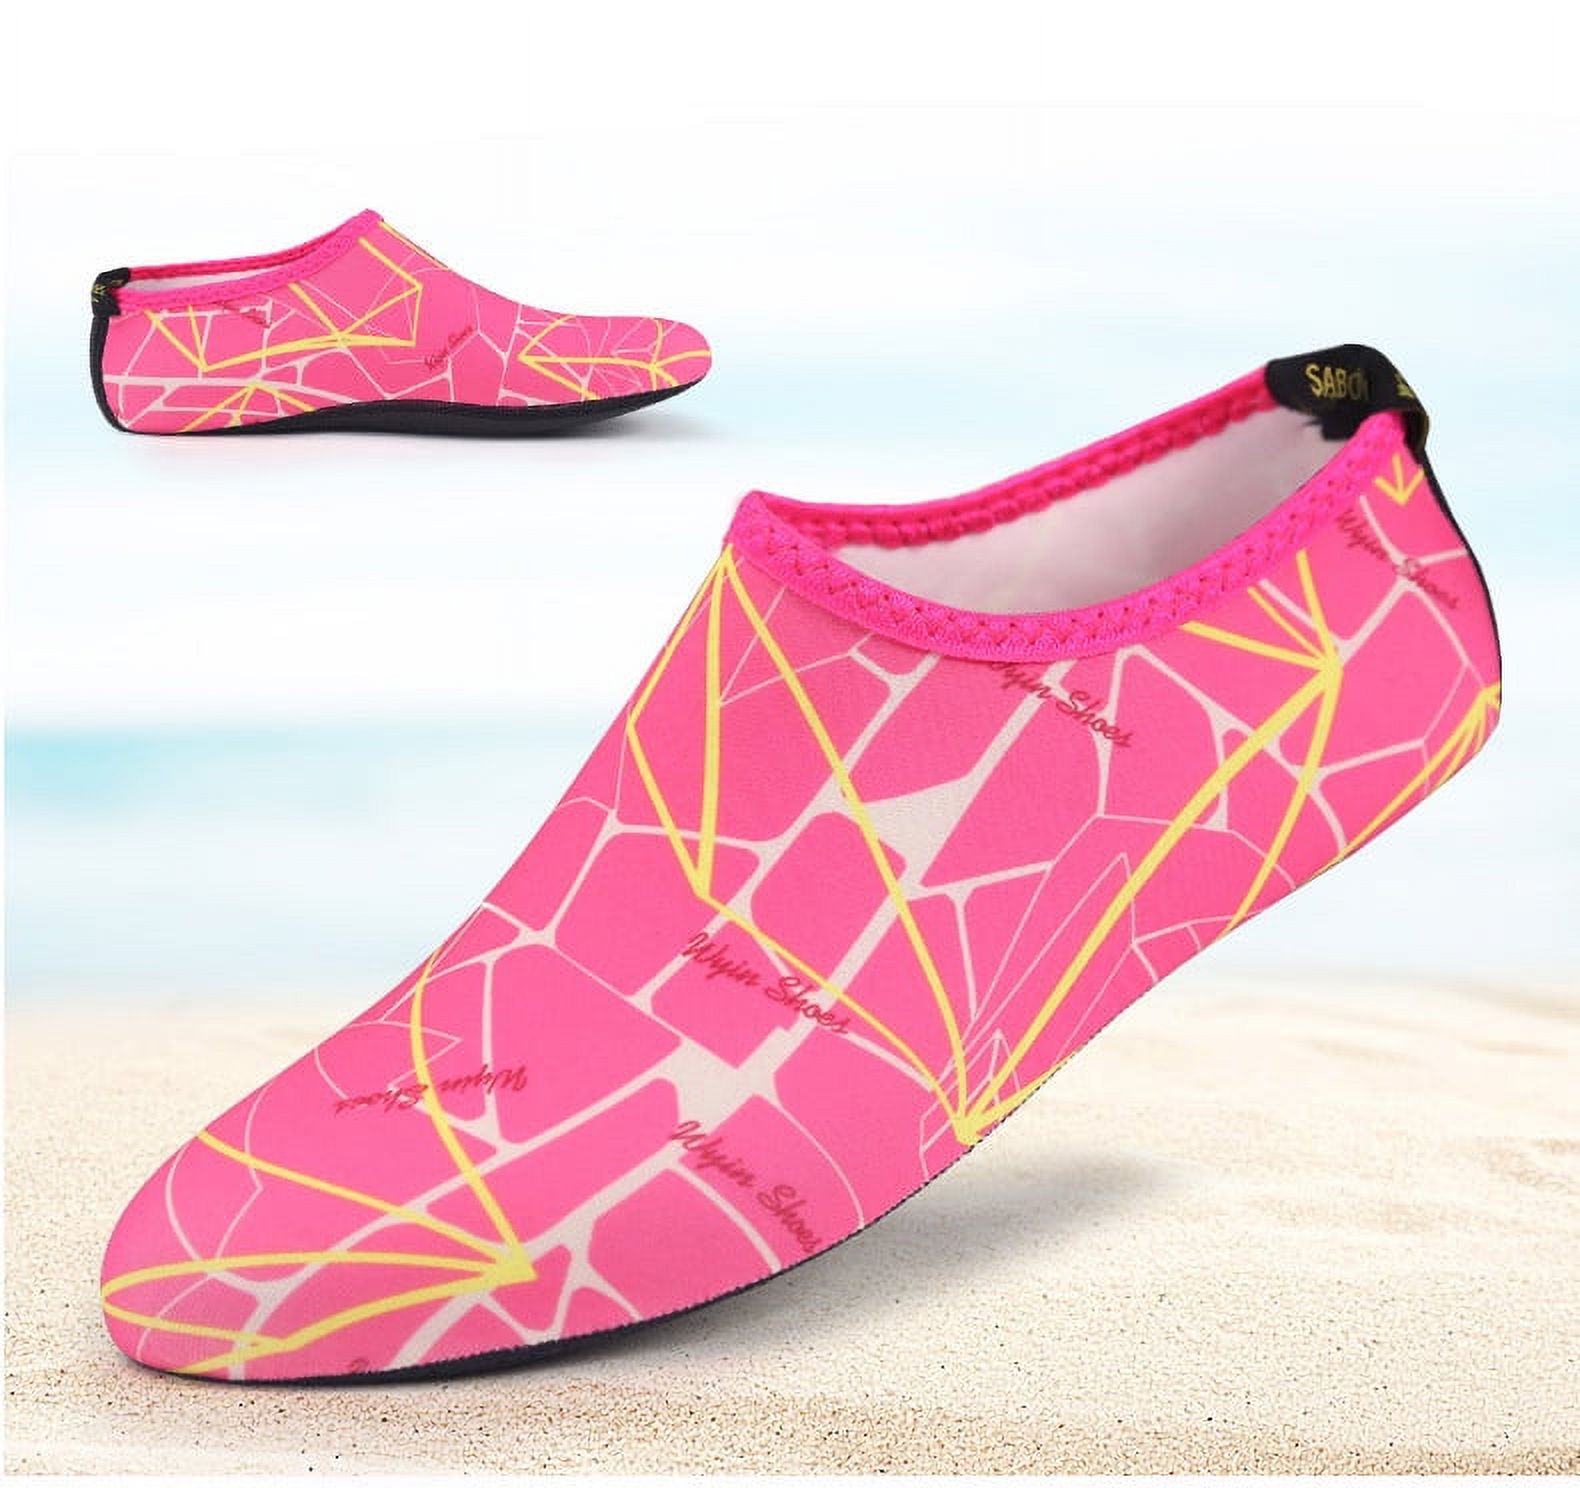 Barefoot Water Skin Shoes, Epicgadget(TM) Quick-Dry Flexible Water Skin Shoes Aqua Socks for Beach, Swim, Diving, Snorkeling, Running, Surfing and Yoga Exercise (Pink/Yellow, XL. US 9-10 EUR 40-41) - image 1 of 2